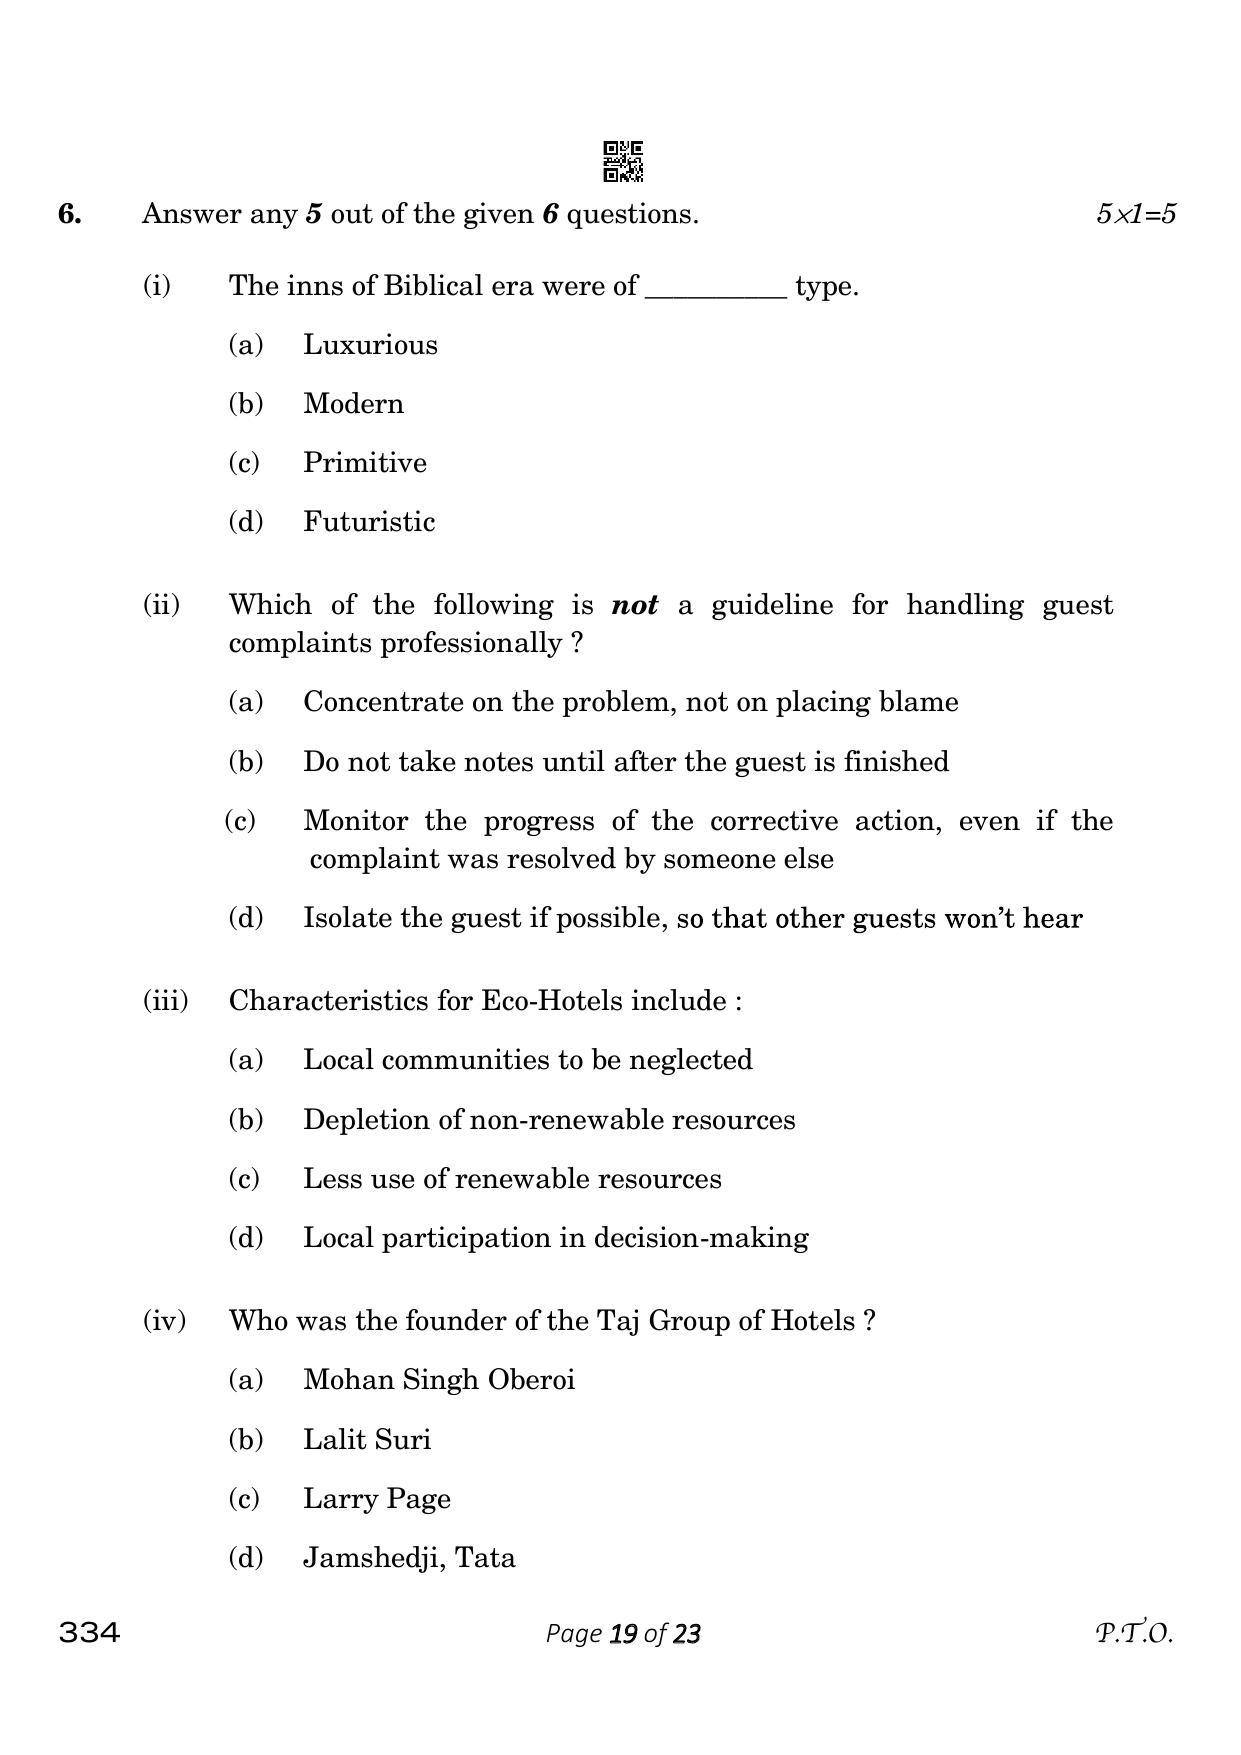 CBSE Class 12 334_Front Office Operations 2023 Question Paper - Page 19